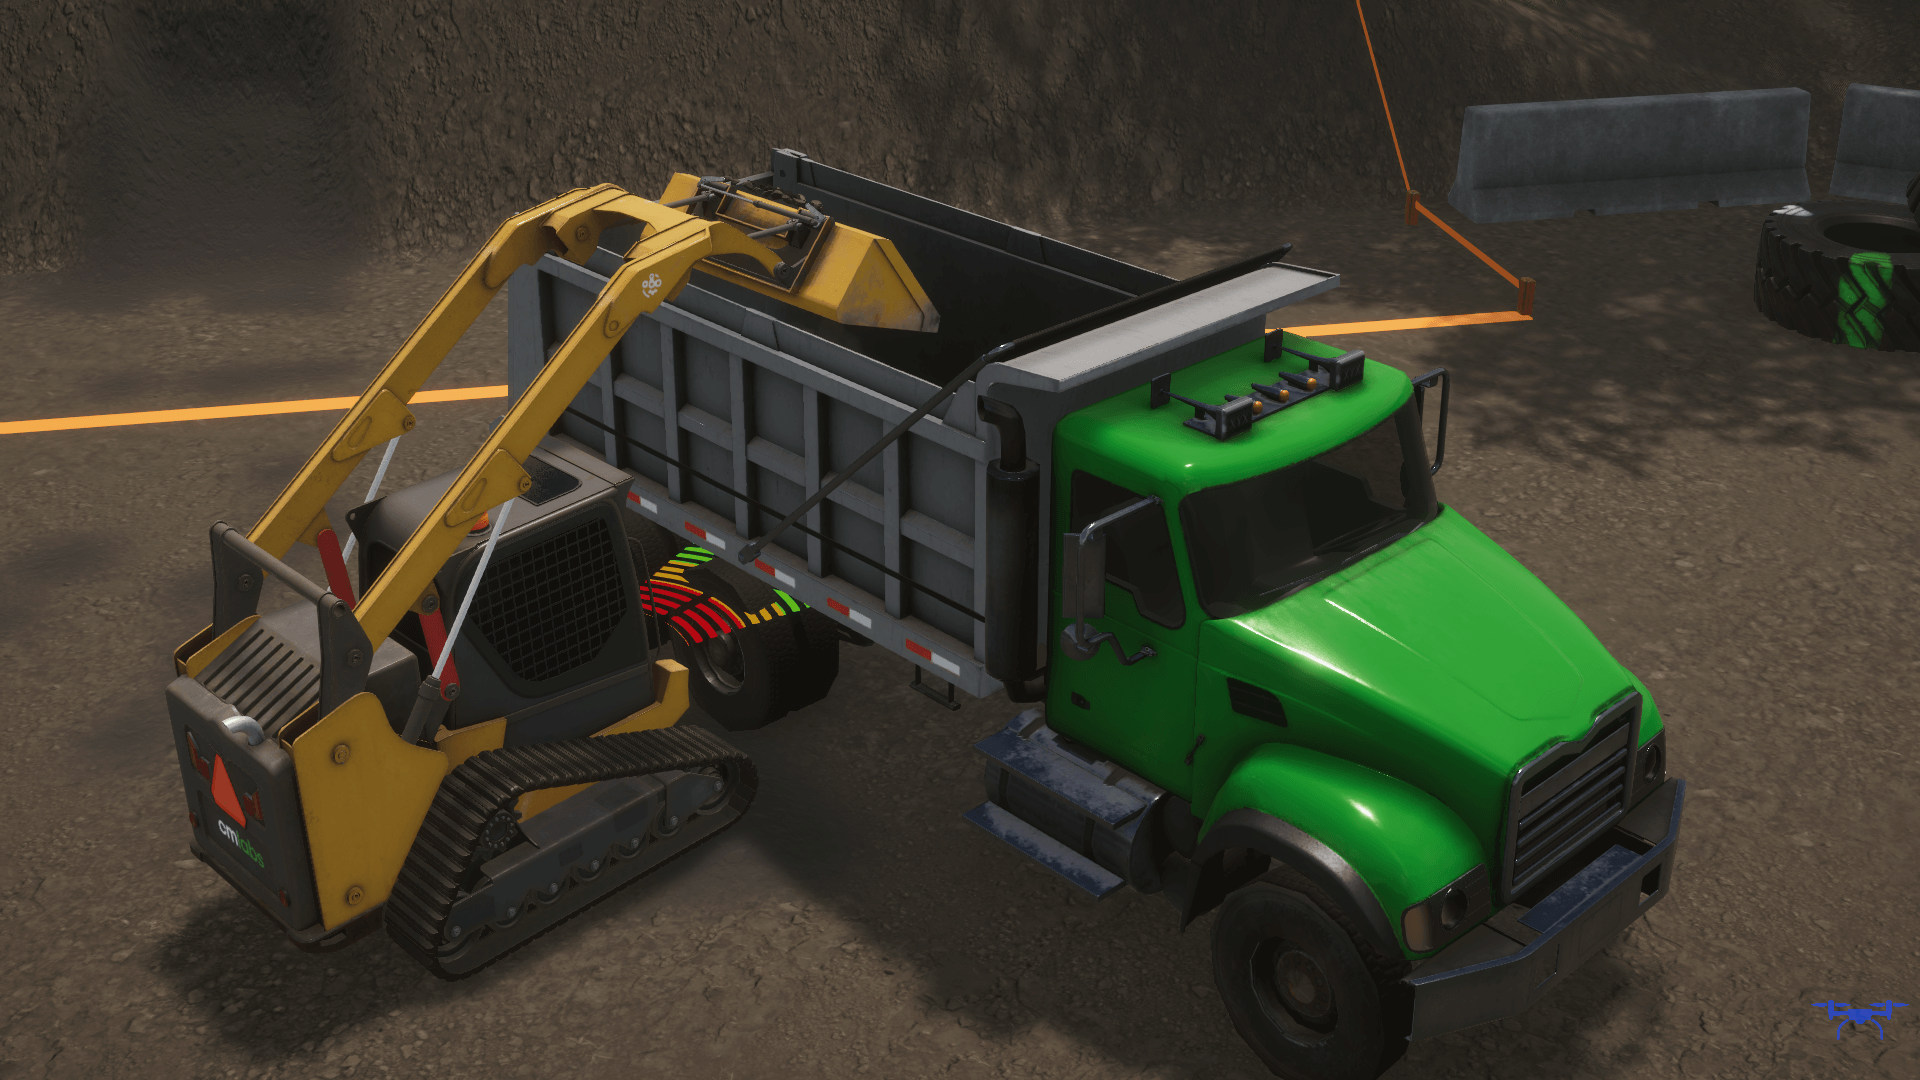 Compact Track Loader Simulator Training Pack – Truck Loading and Dumping exercise